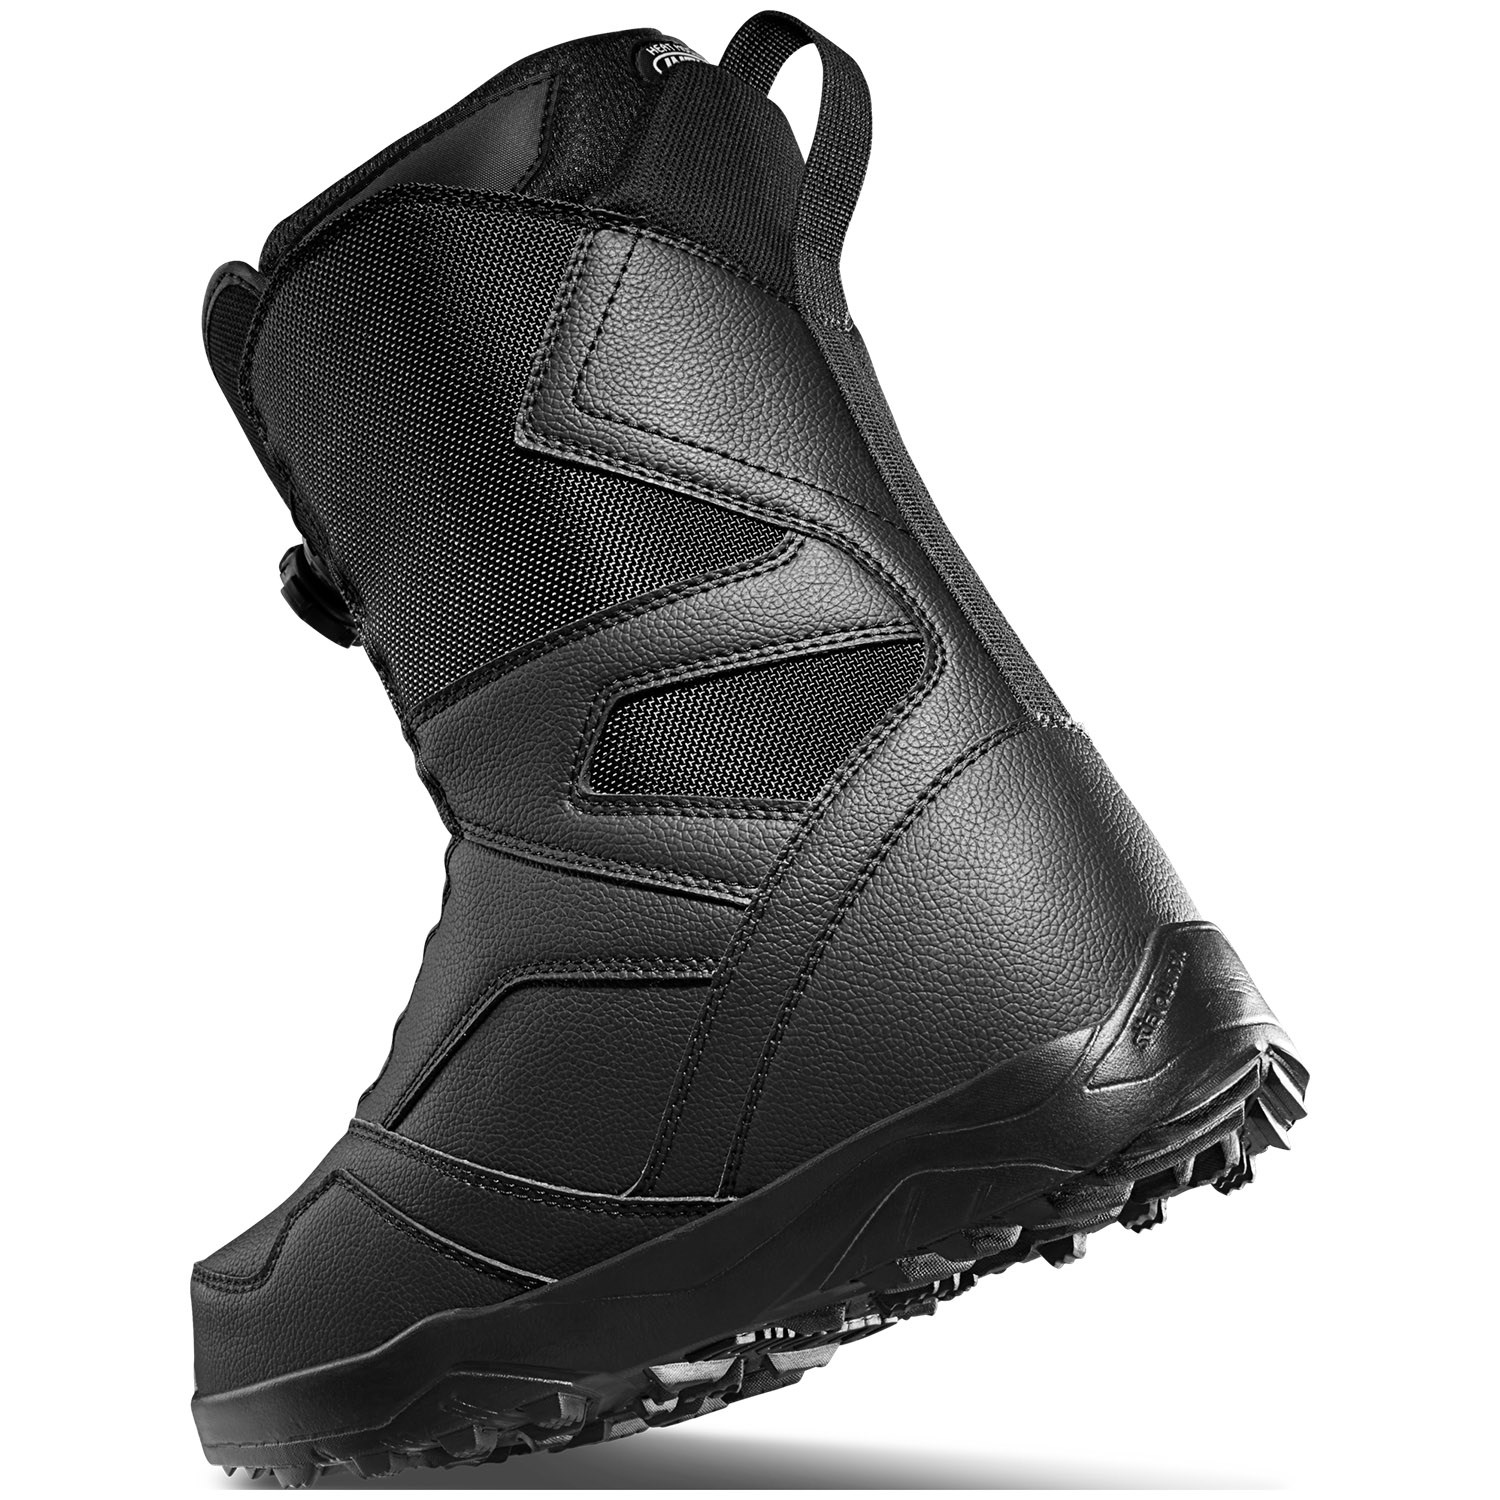 Thirty Two STW Double BOA Mens Snowboard Boots 